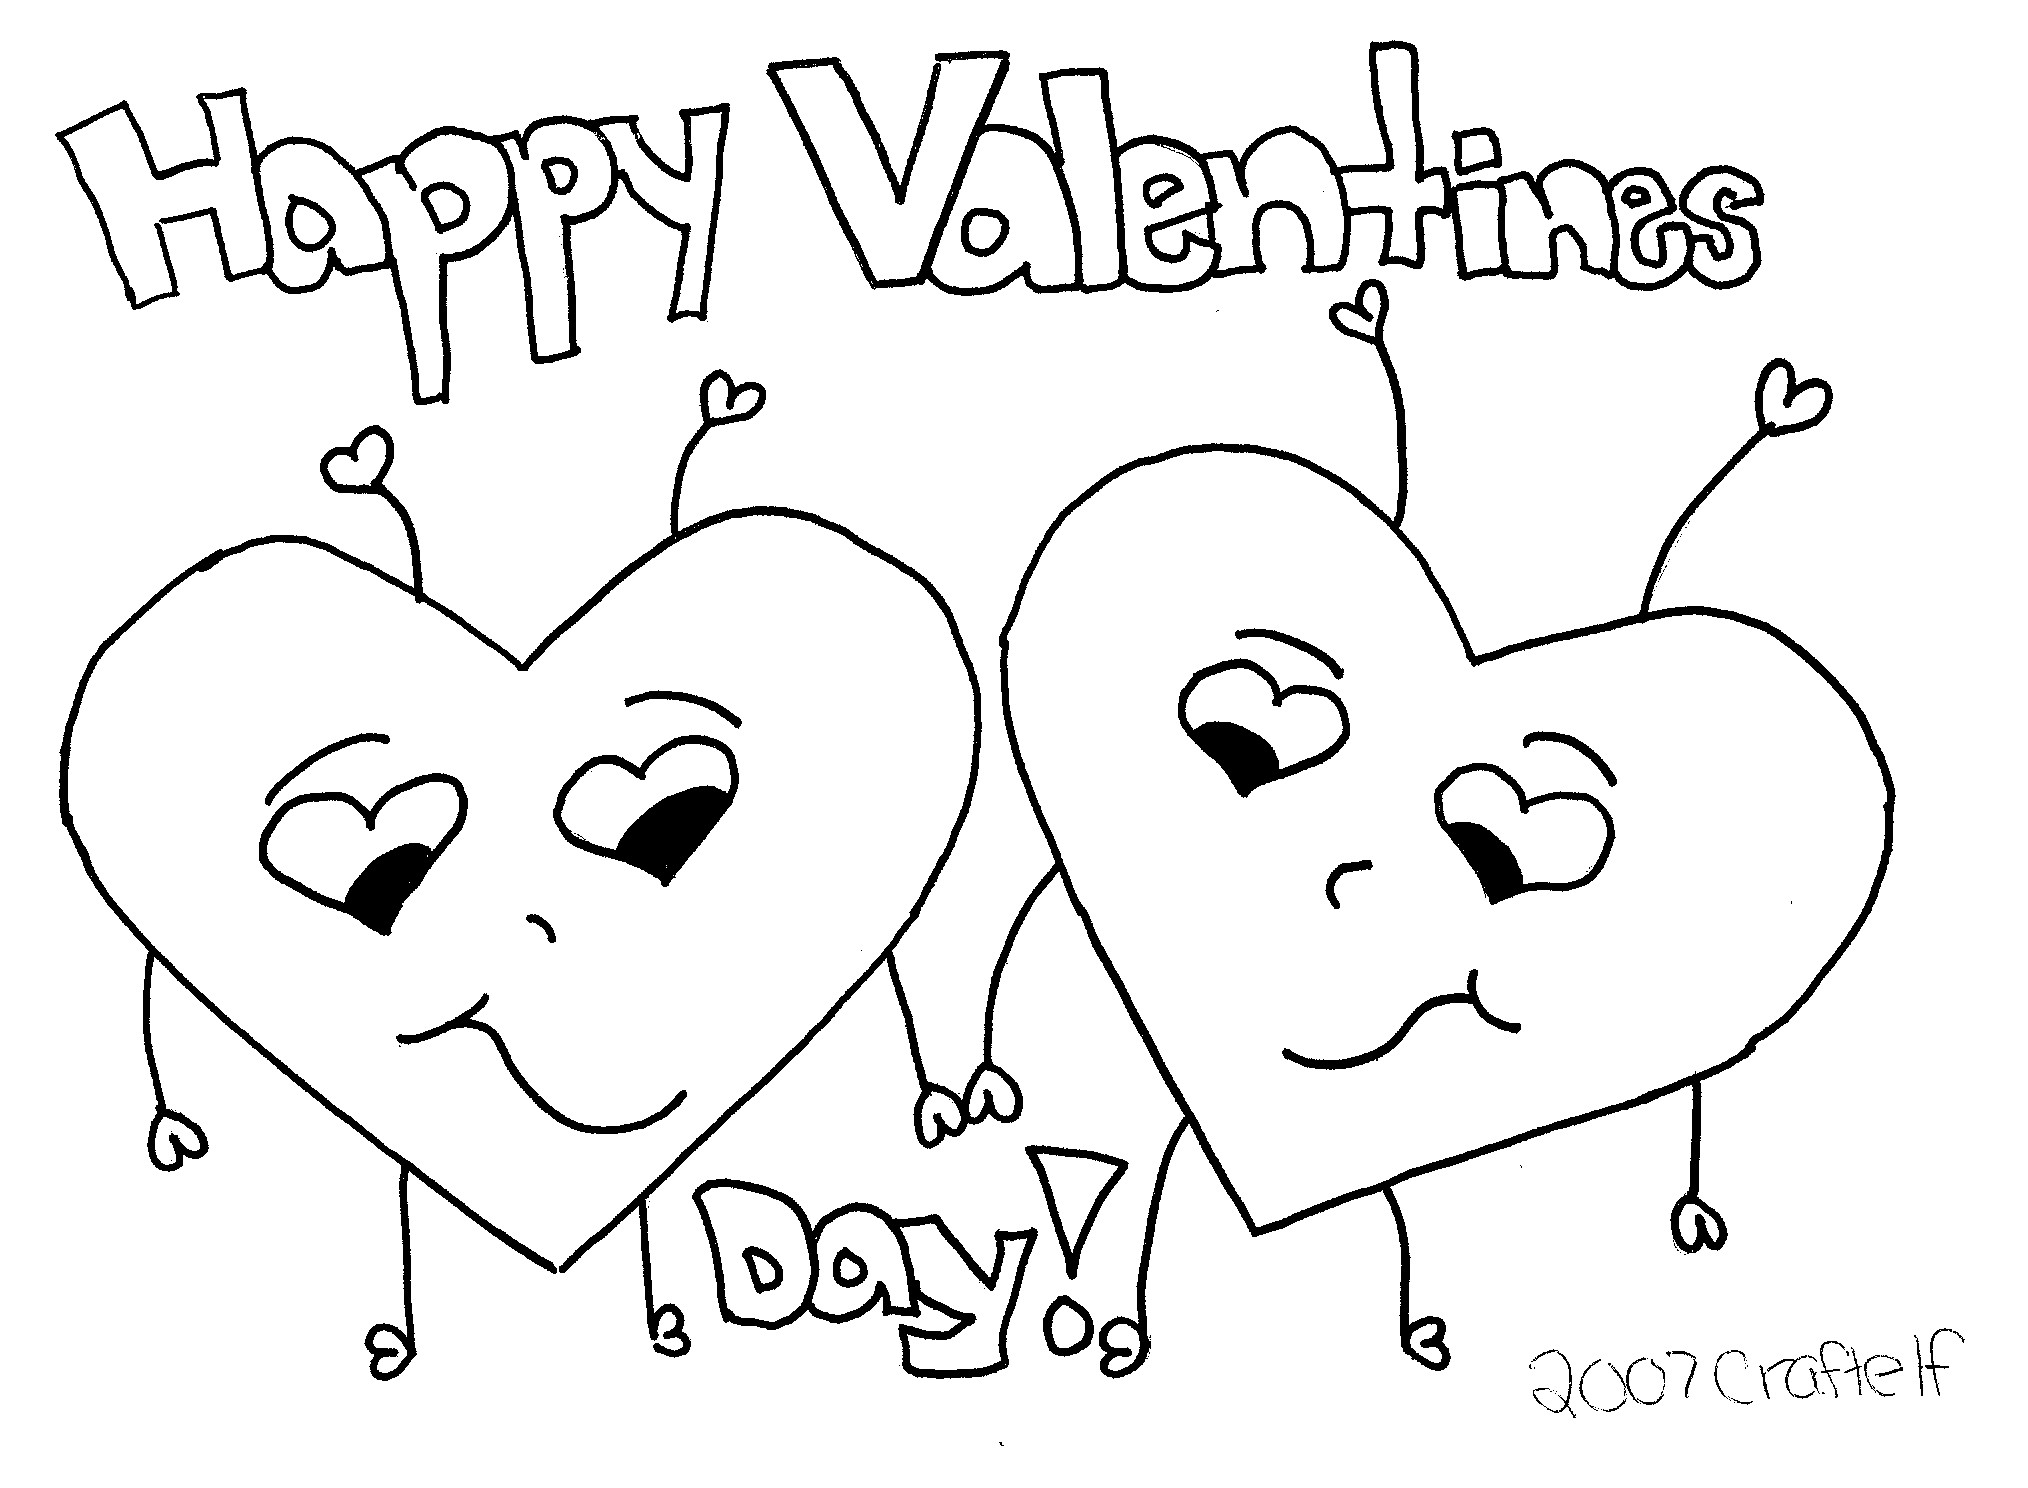 25-of-the-best-ideas-for-coloring-pages-for-kids-valentines-day-home